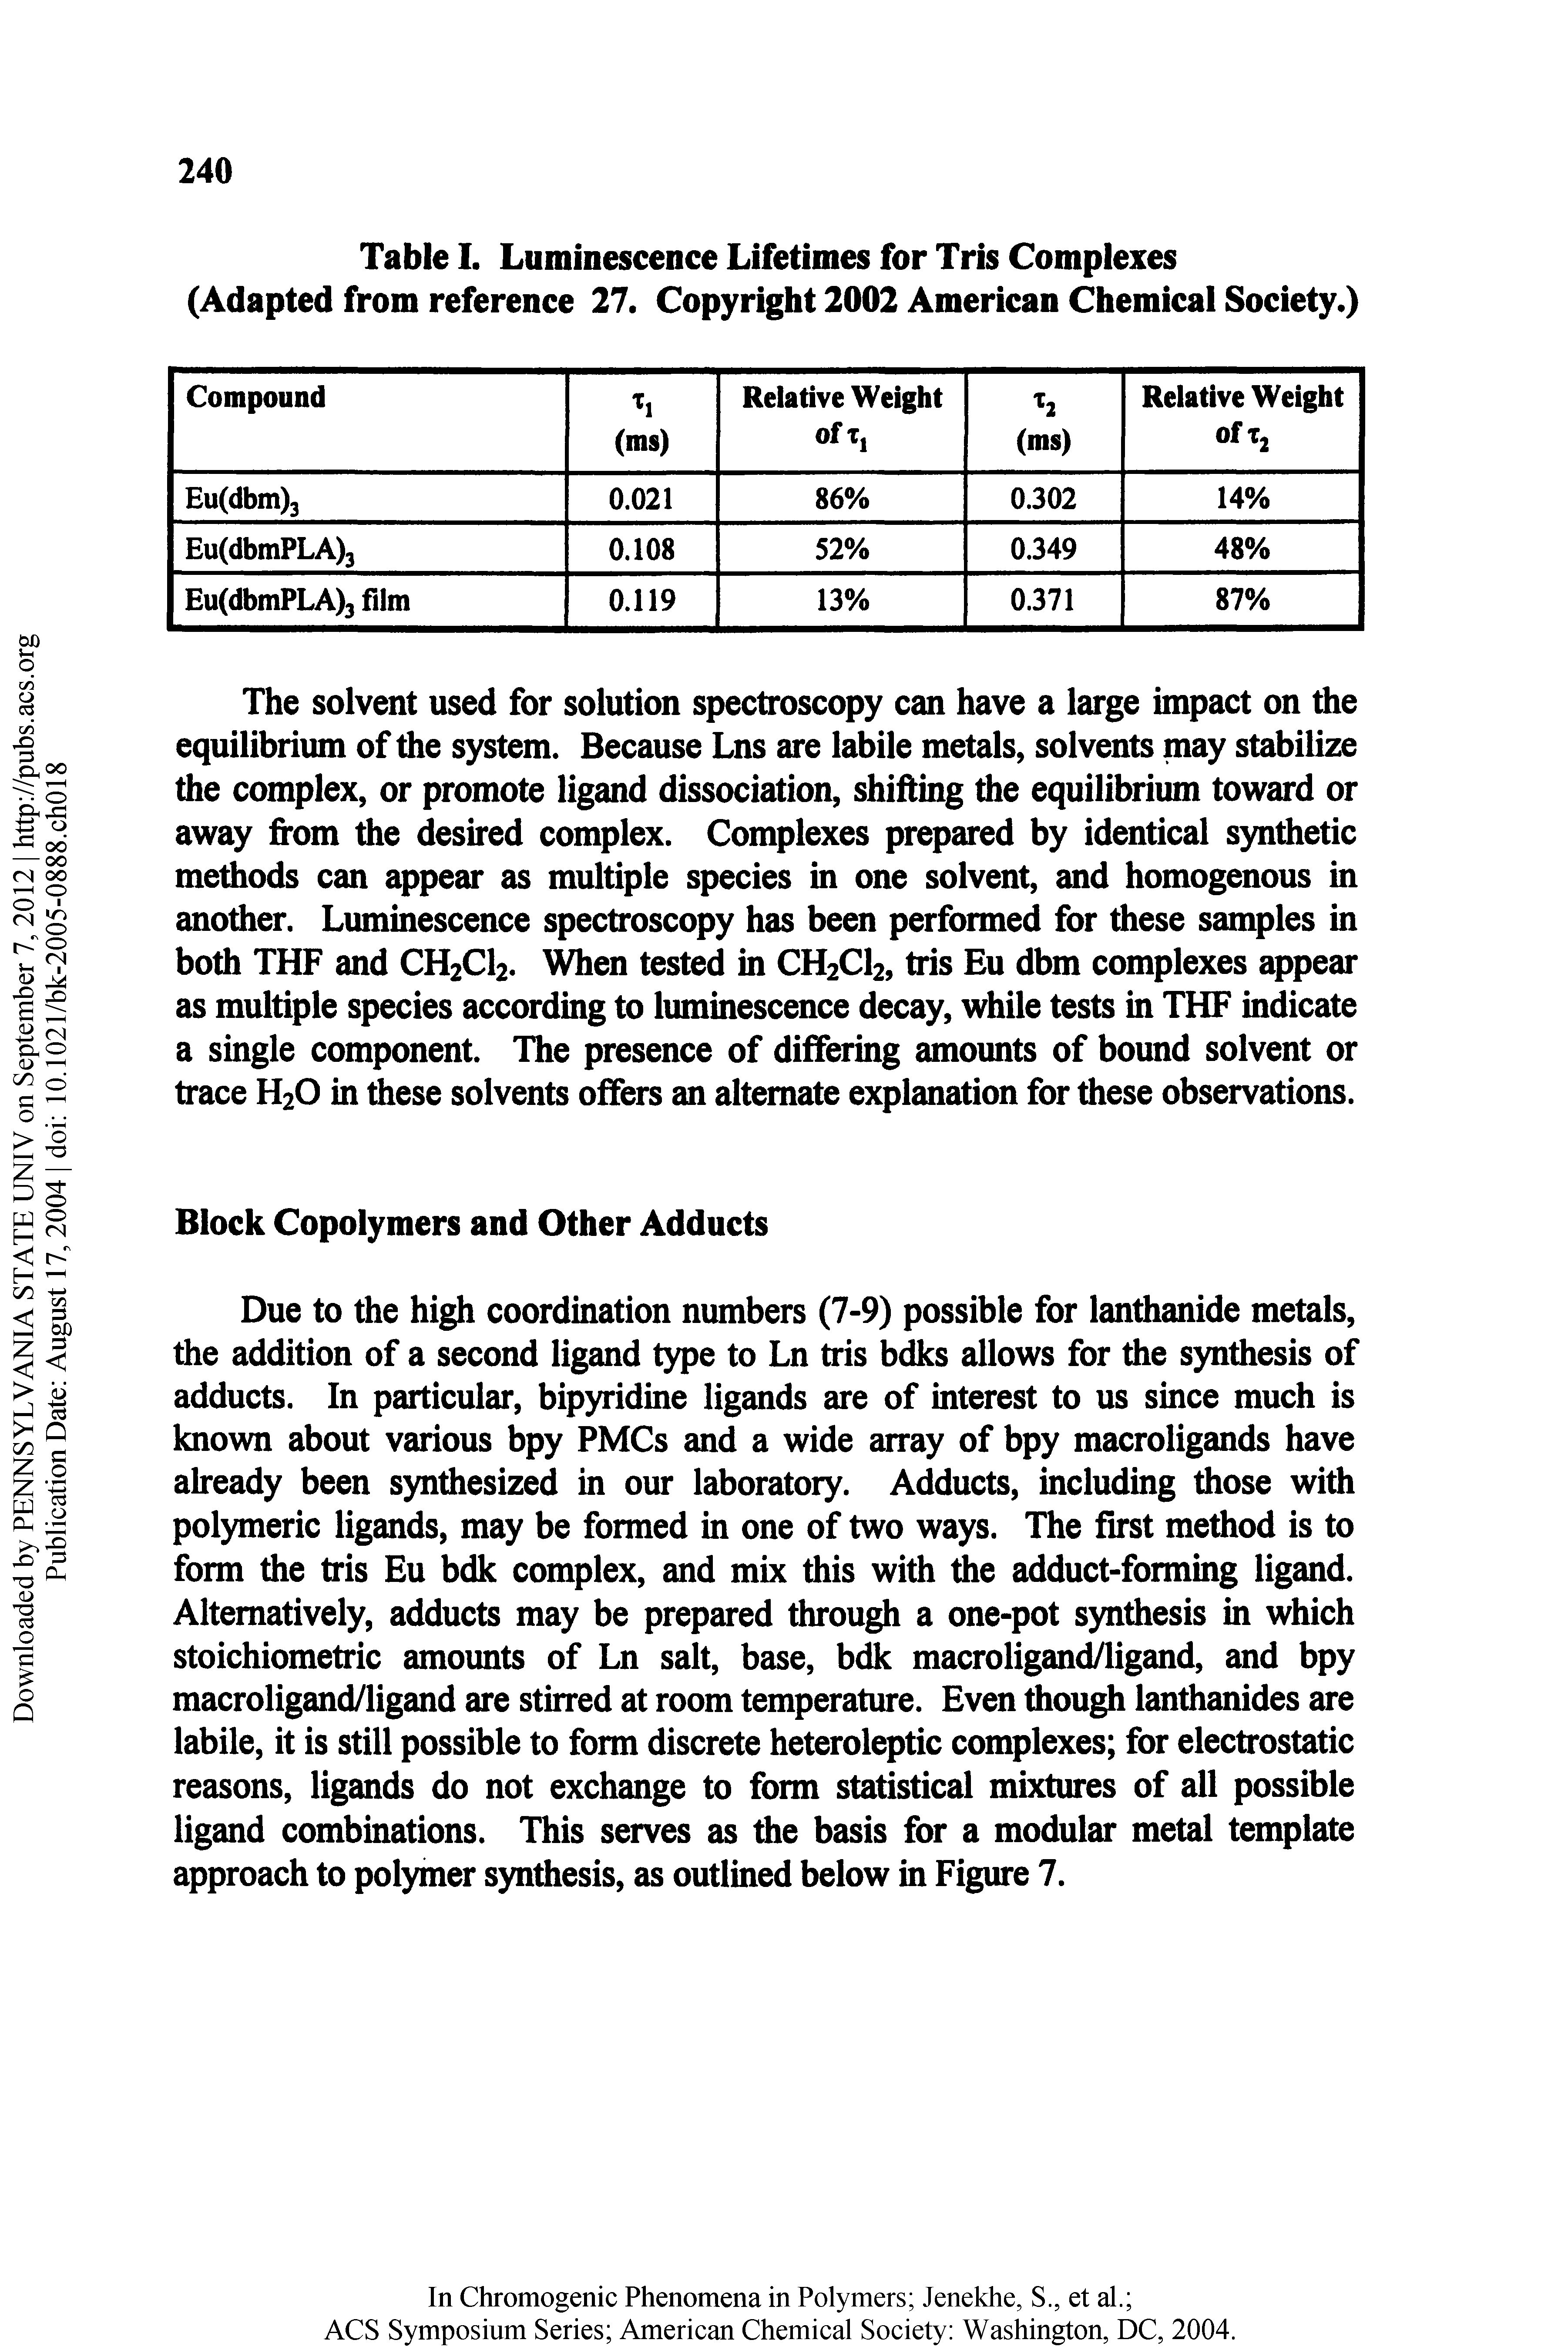 Table I. Luminescence Lifetimes for Tris Complexes (Adapted from reference 27. Copyright 2002 American Chemical Society.)...